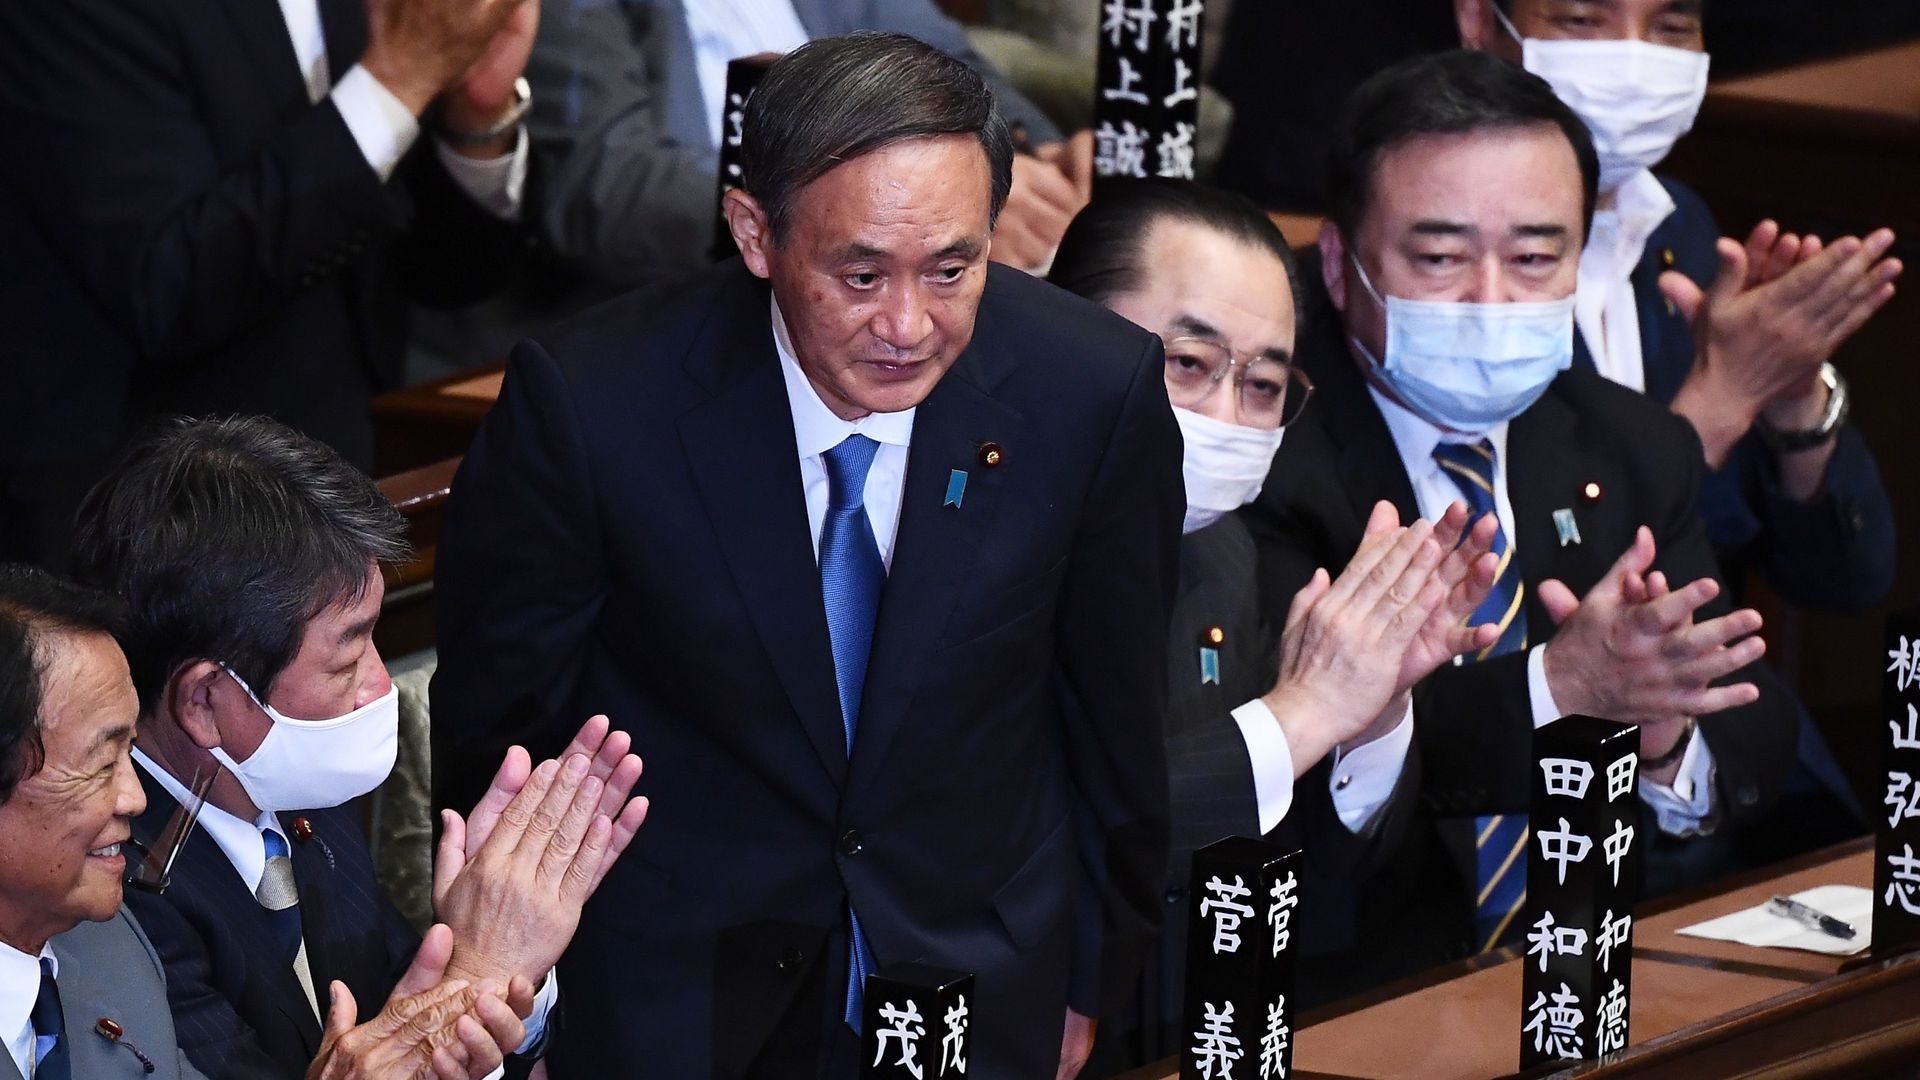 Newly elected leader of Japan's Liberal Democratic Party (LDP) Yoshihide Suga (C) is applauded after he was elected as Japan's prime minister